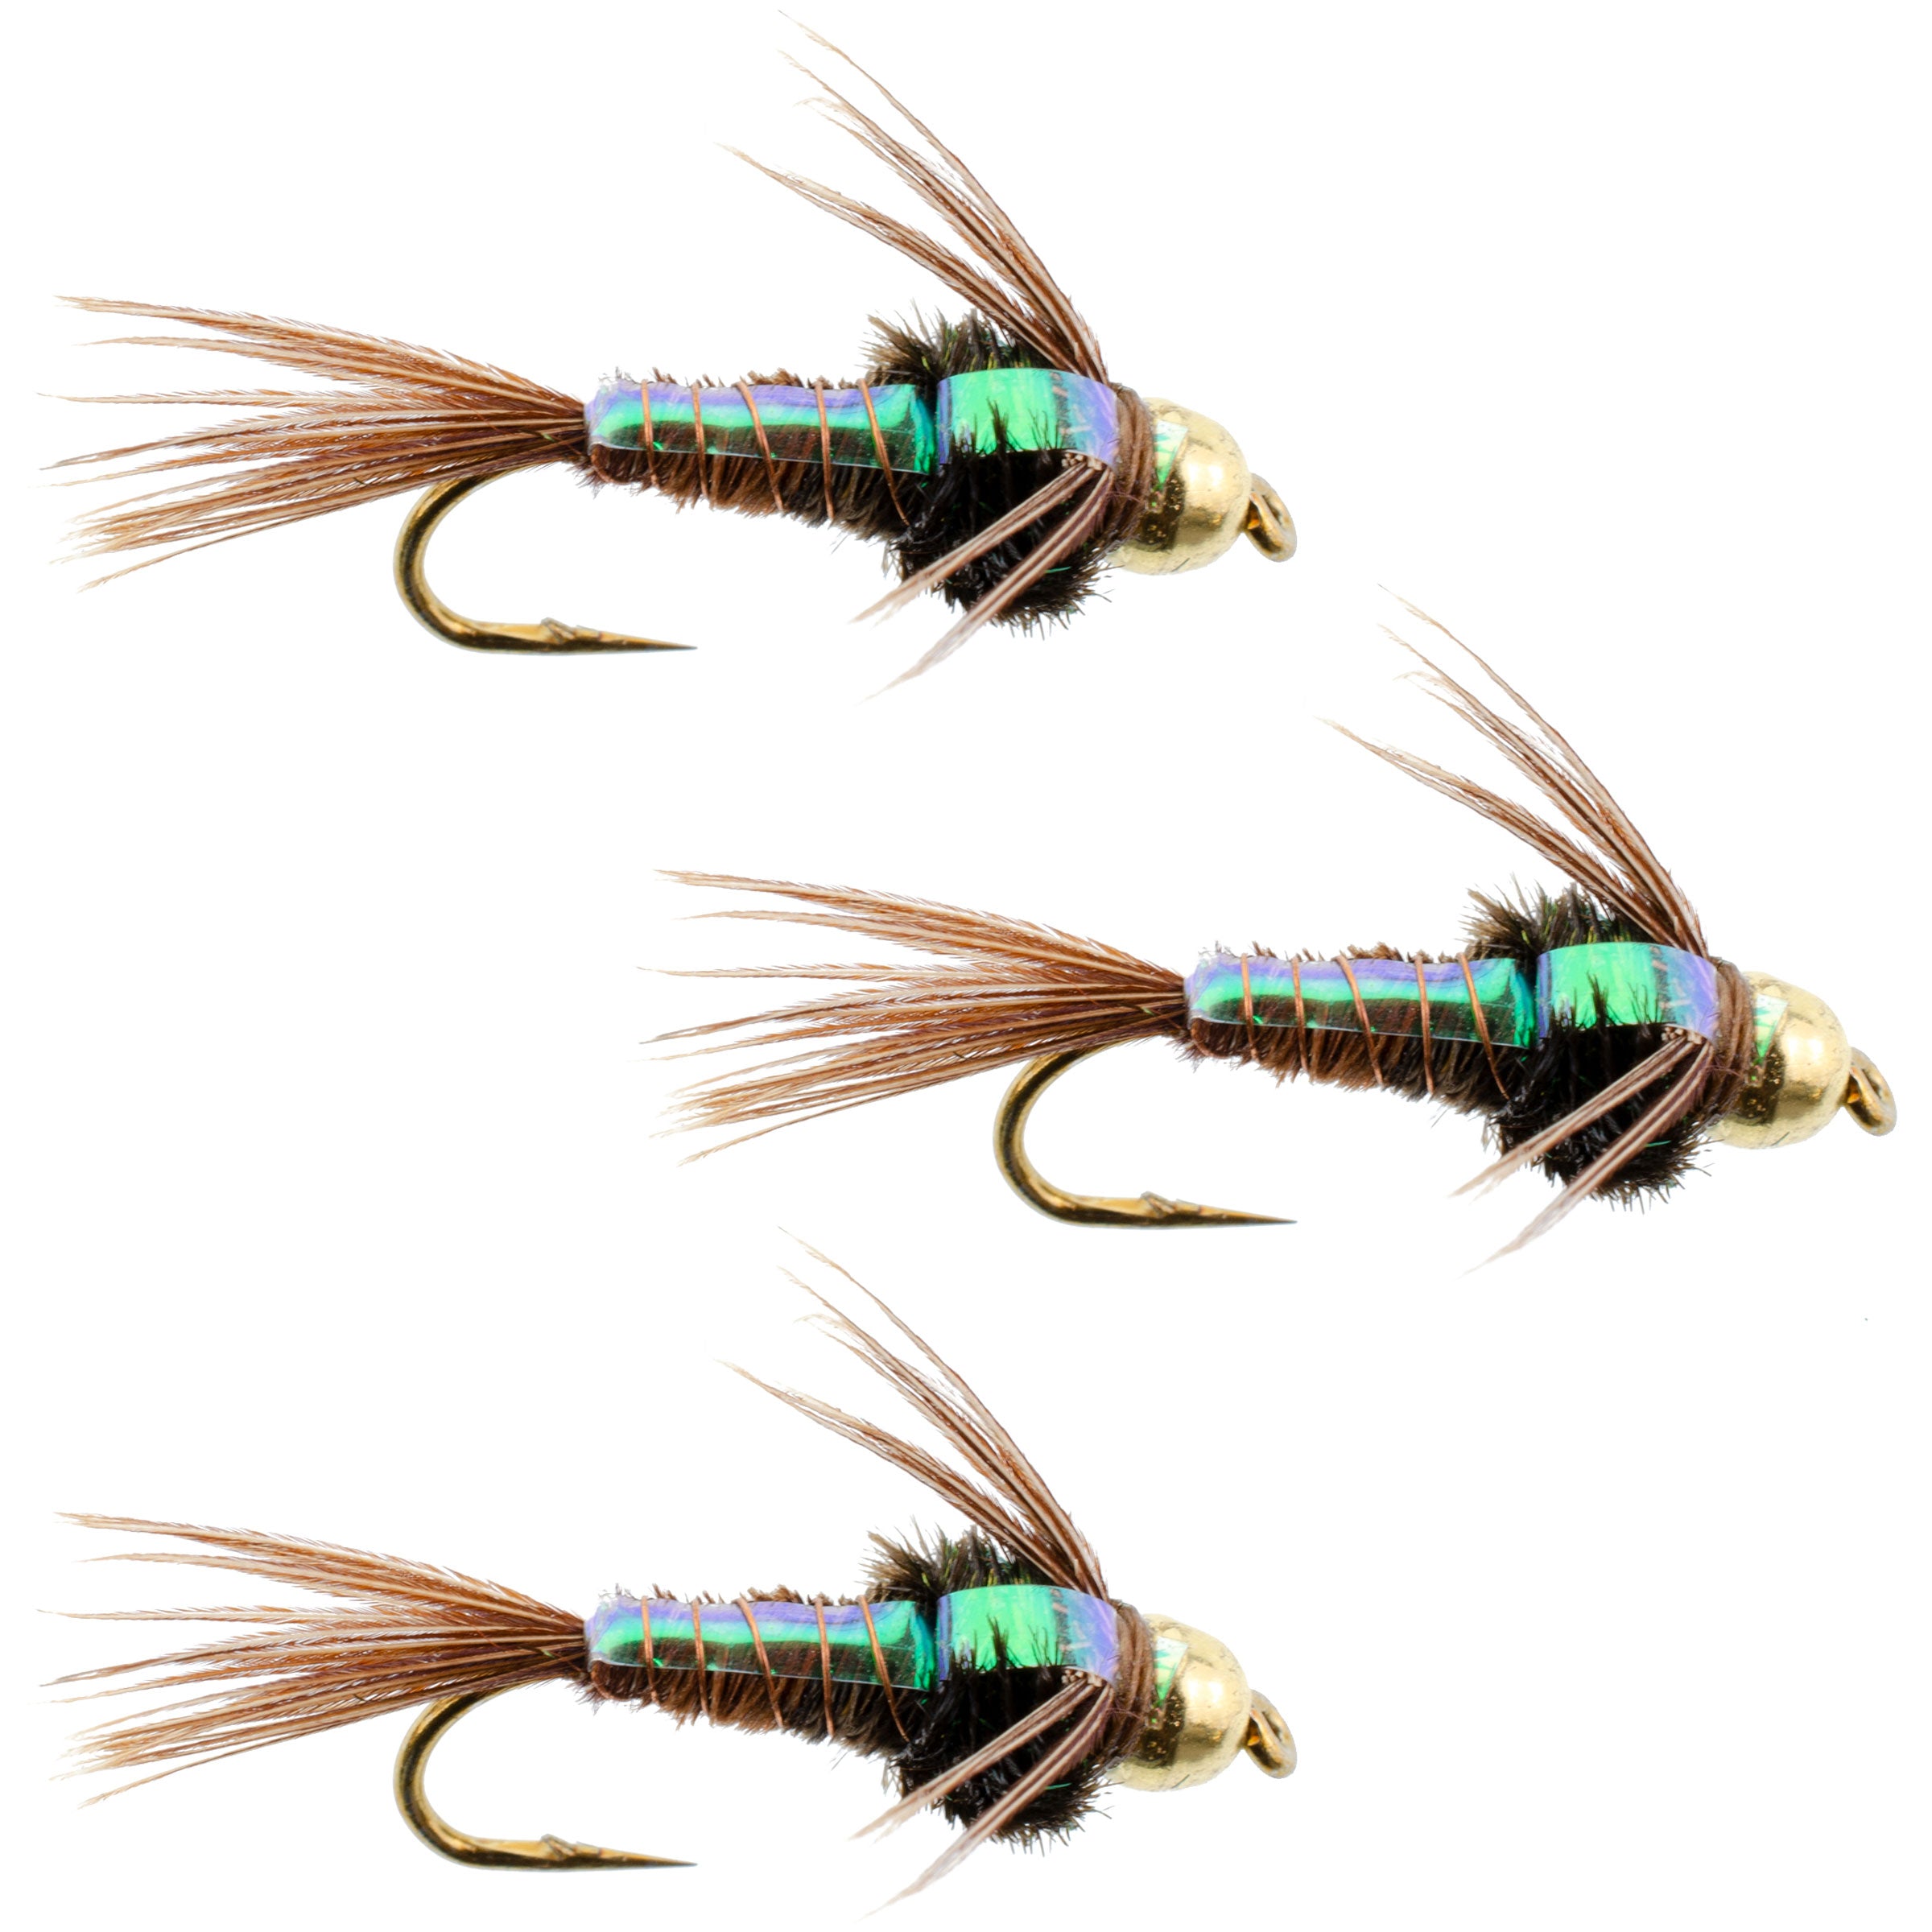 3 Pack Bead Head Flashback Pheasant Tail Nymph Fly Fishing Flies Hook Size 14